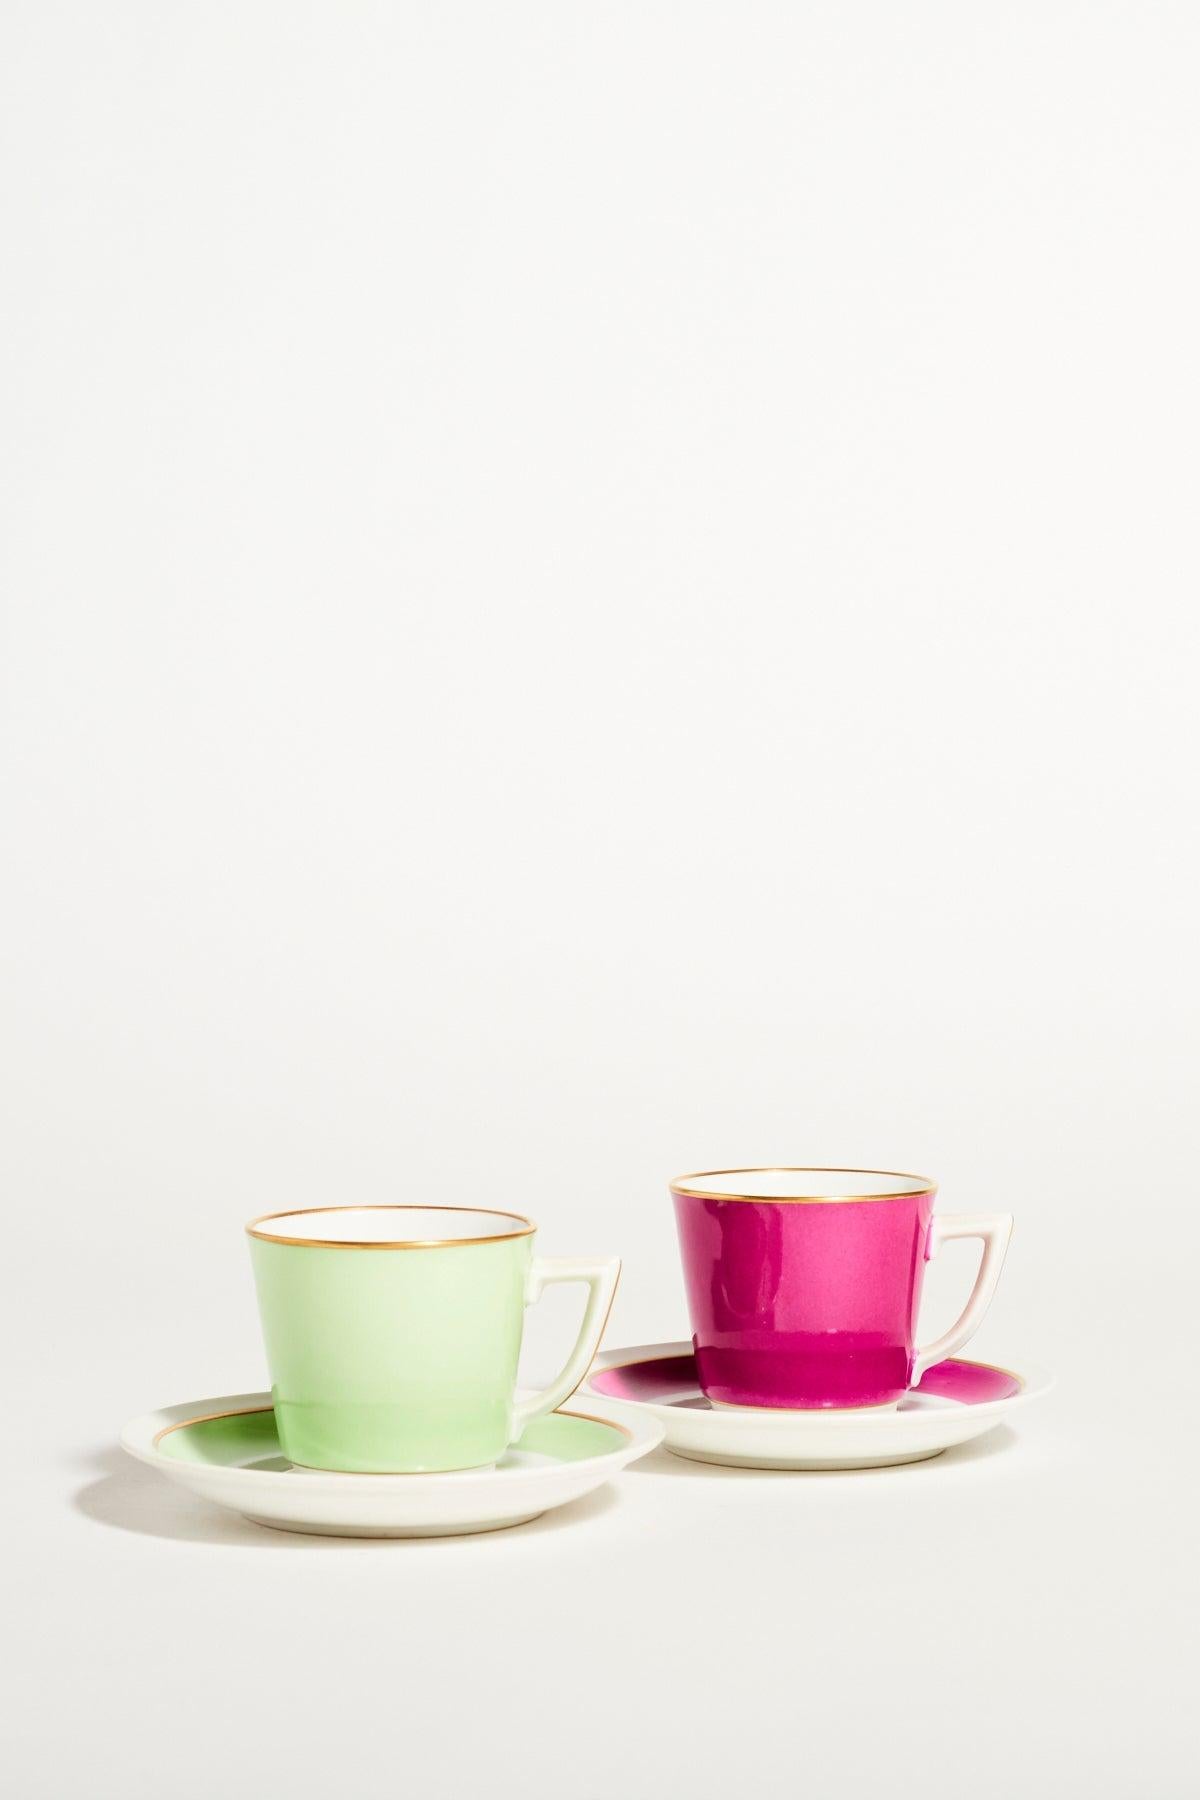 Royal Copenhagen quality porcelain demitasse set of two in fuchsia, mint green and crisp white accented with gold, elegant square handles, maker’s mark on base.

 